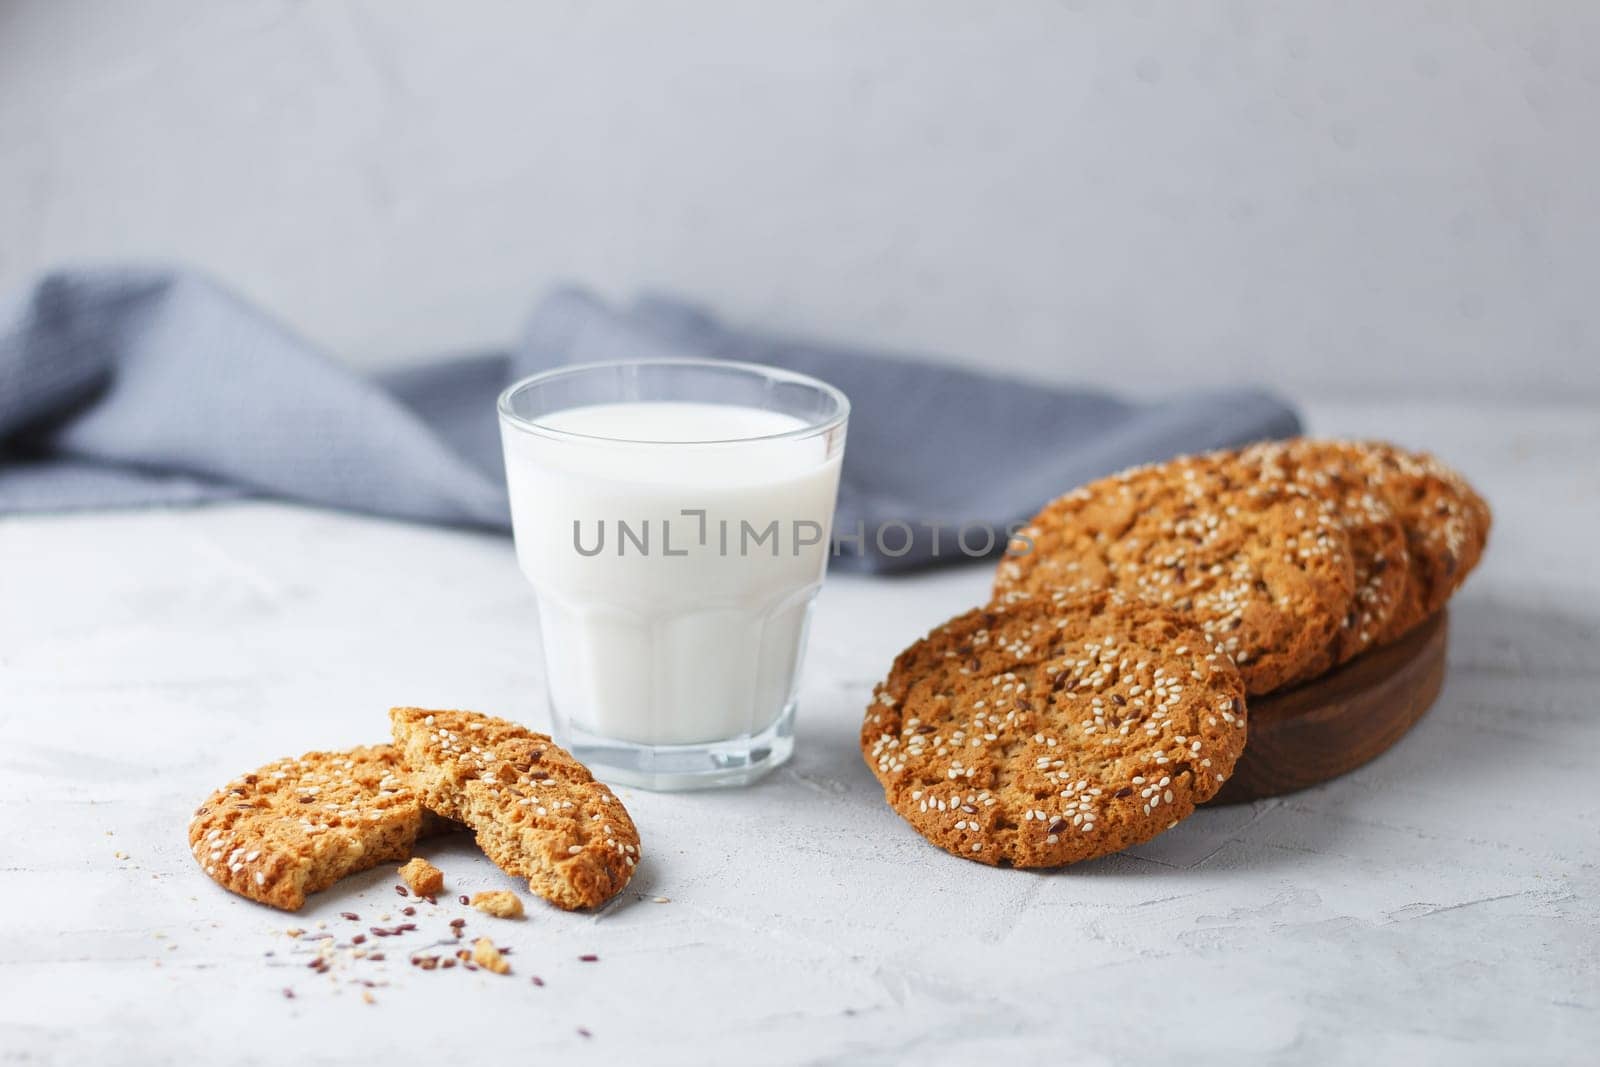 Oatmeal cookies with sesame seeds and flax seeds with a glass of milk on a gray background.